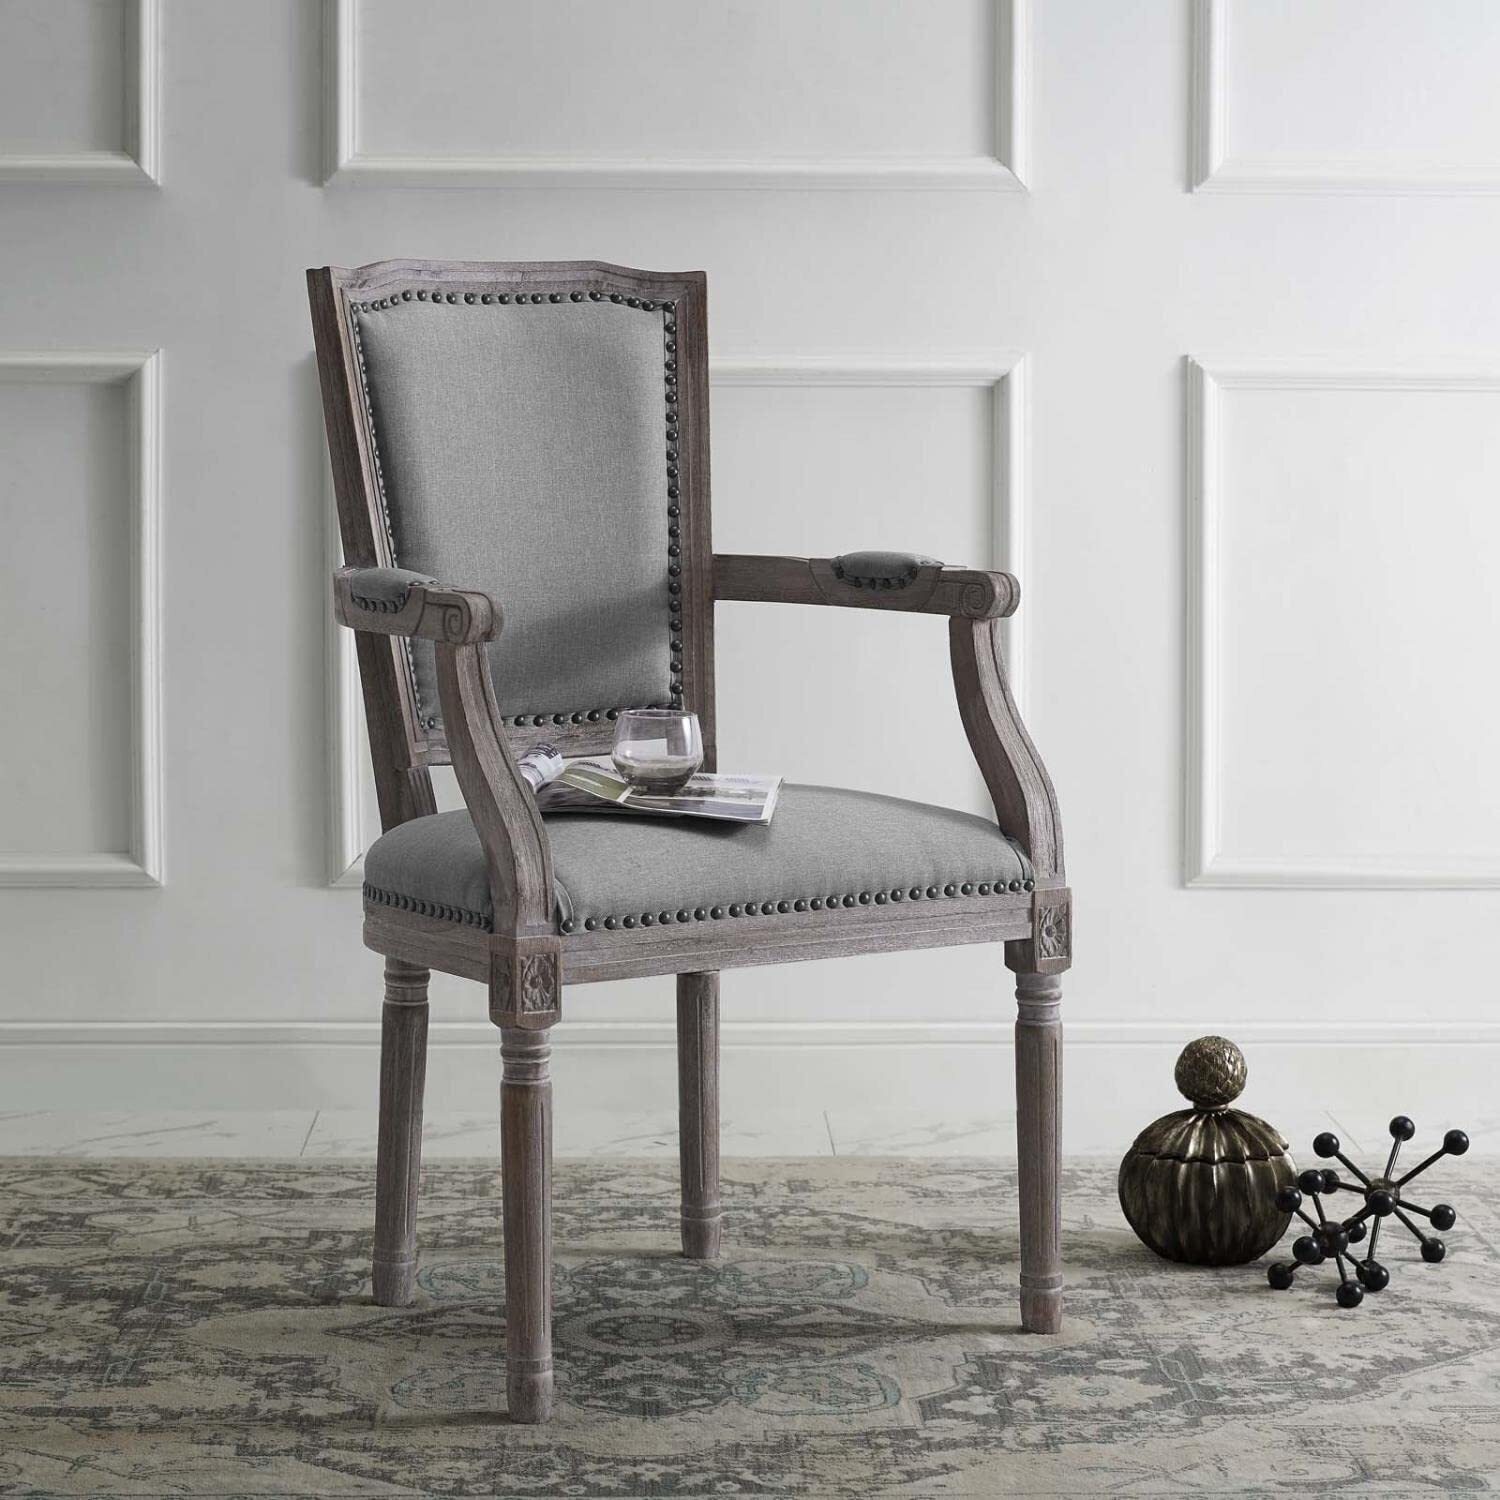 Cottage Style Louis XVI Chairs